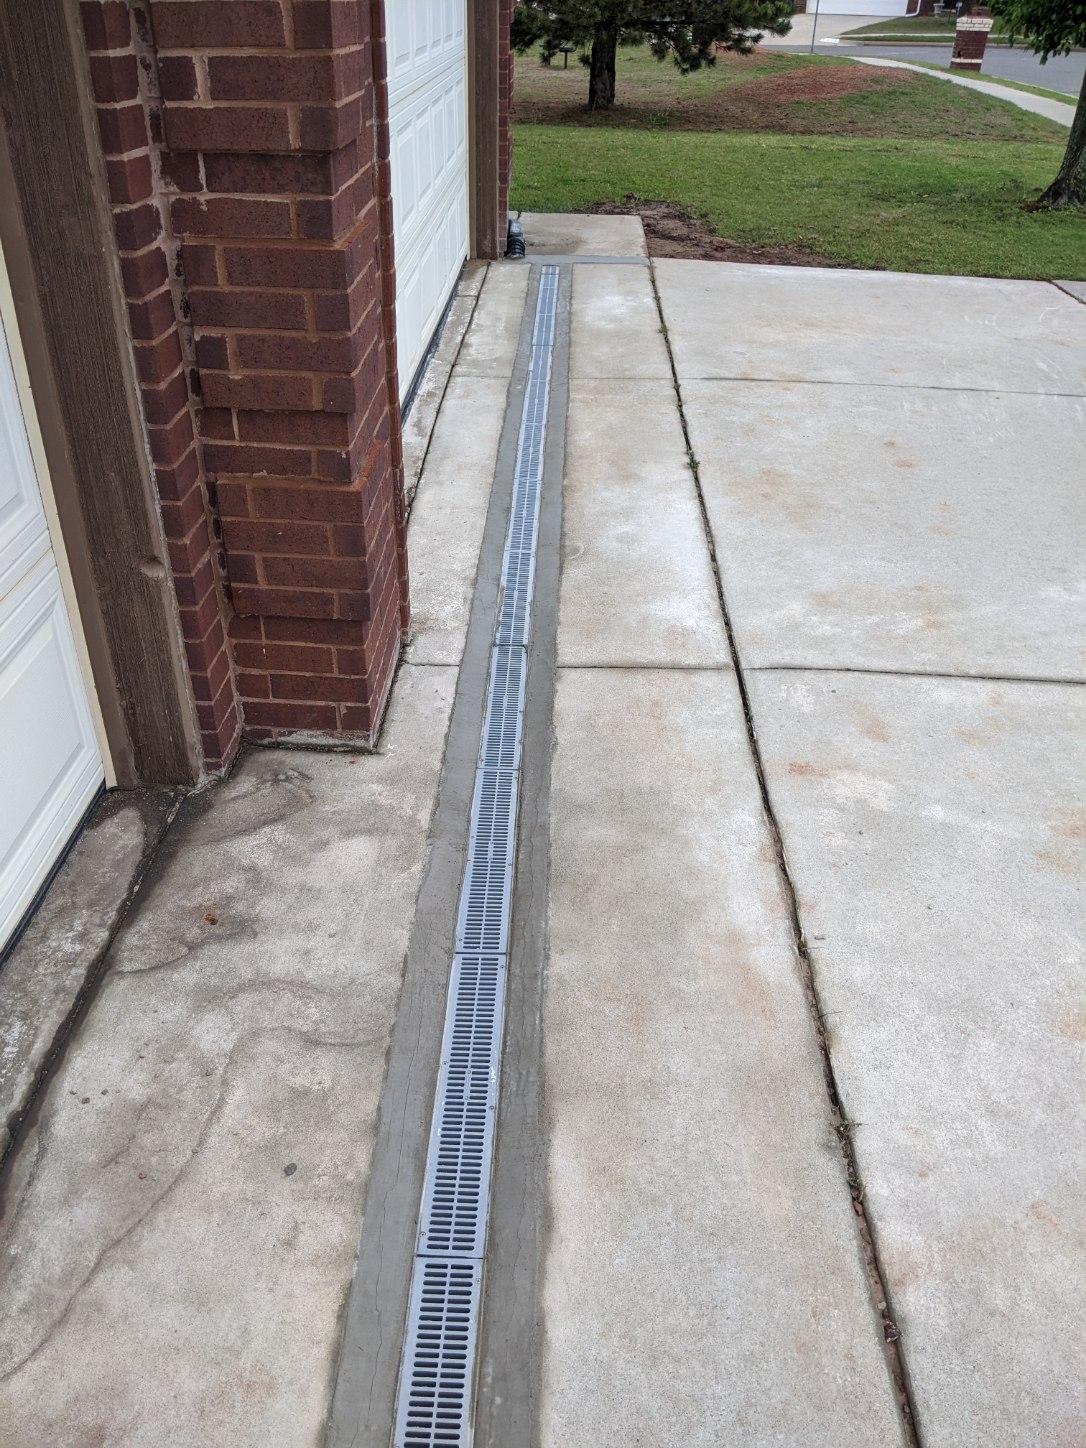 NDS Grey Composite Channel Drain Running Across Driveway Connected to 4 Inch ADS Solid Drain Pipe